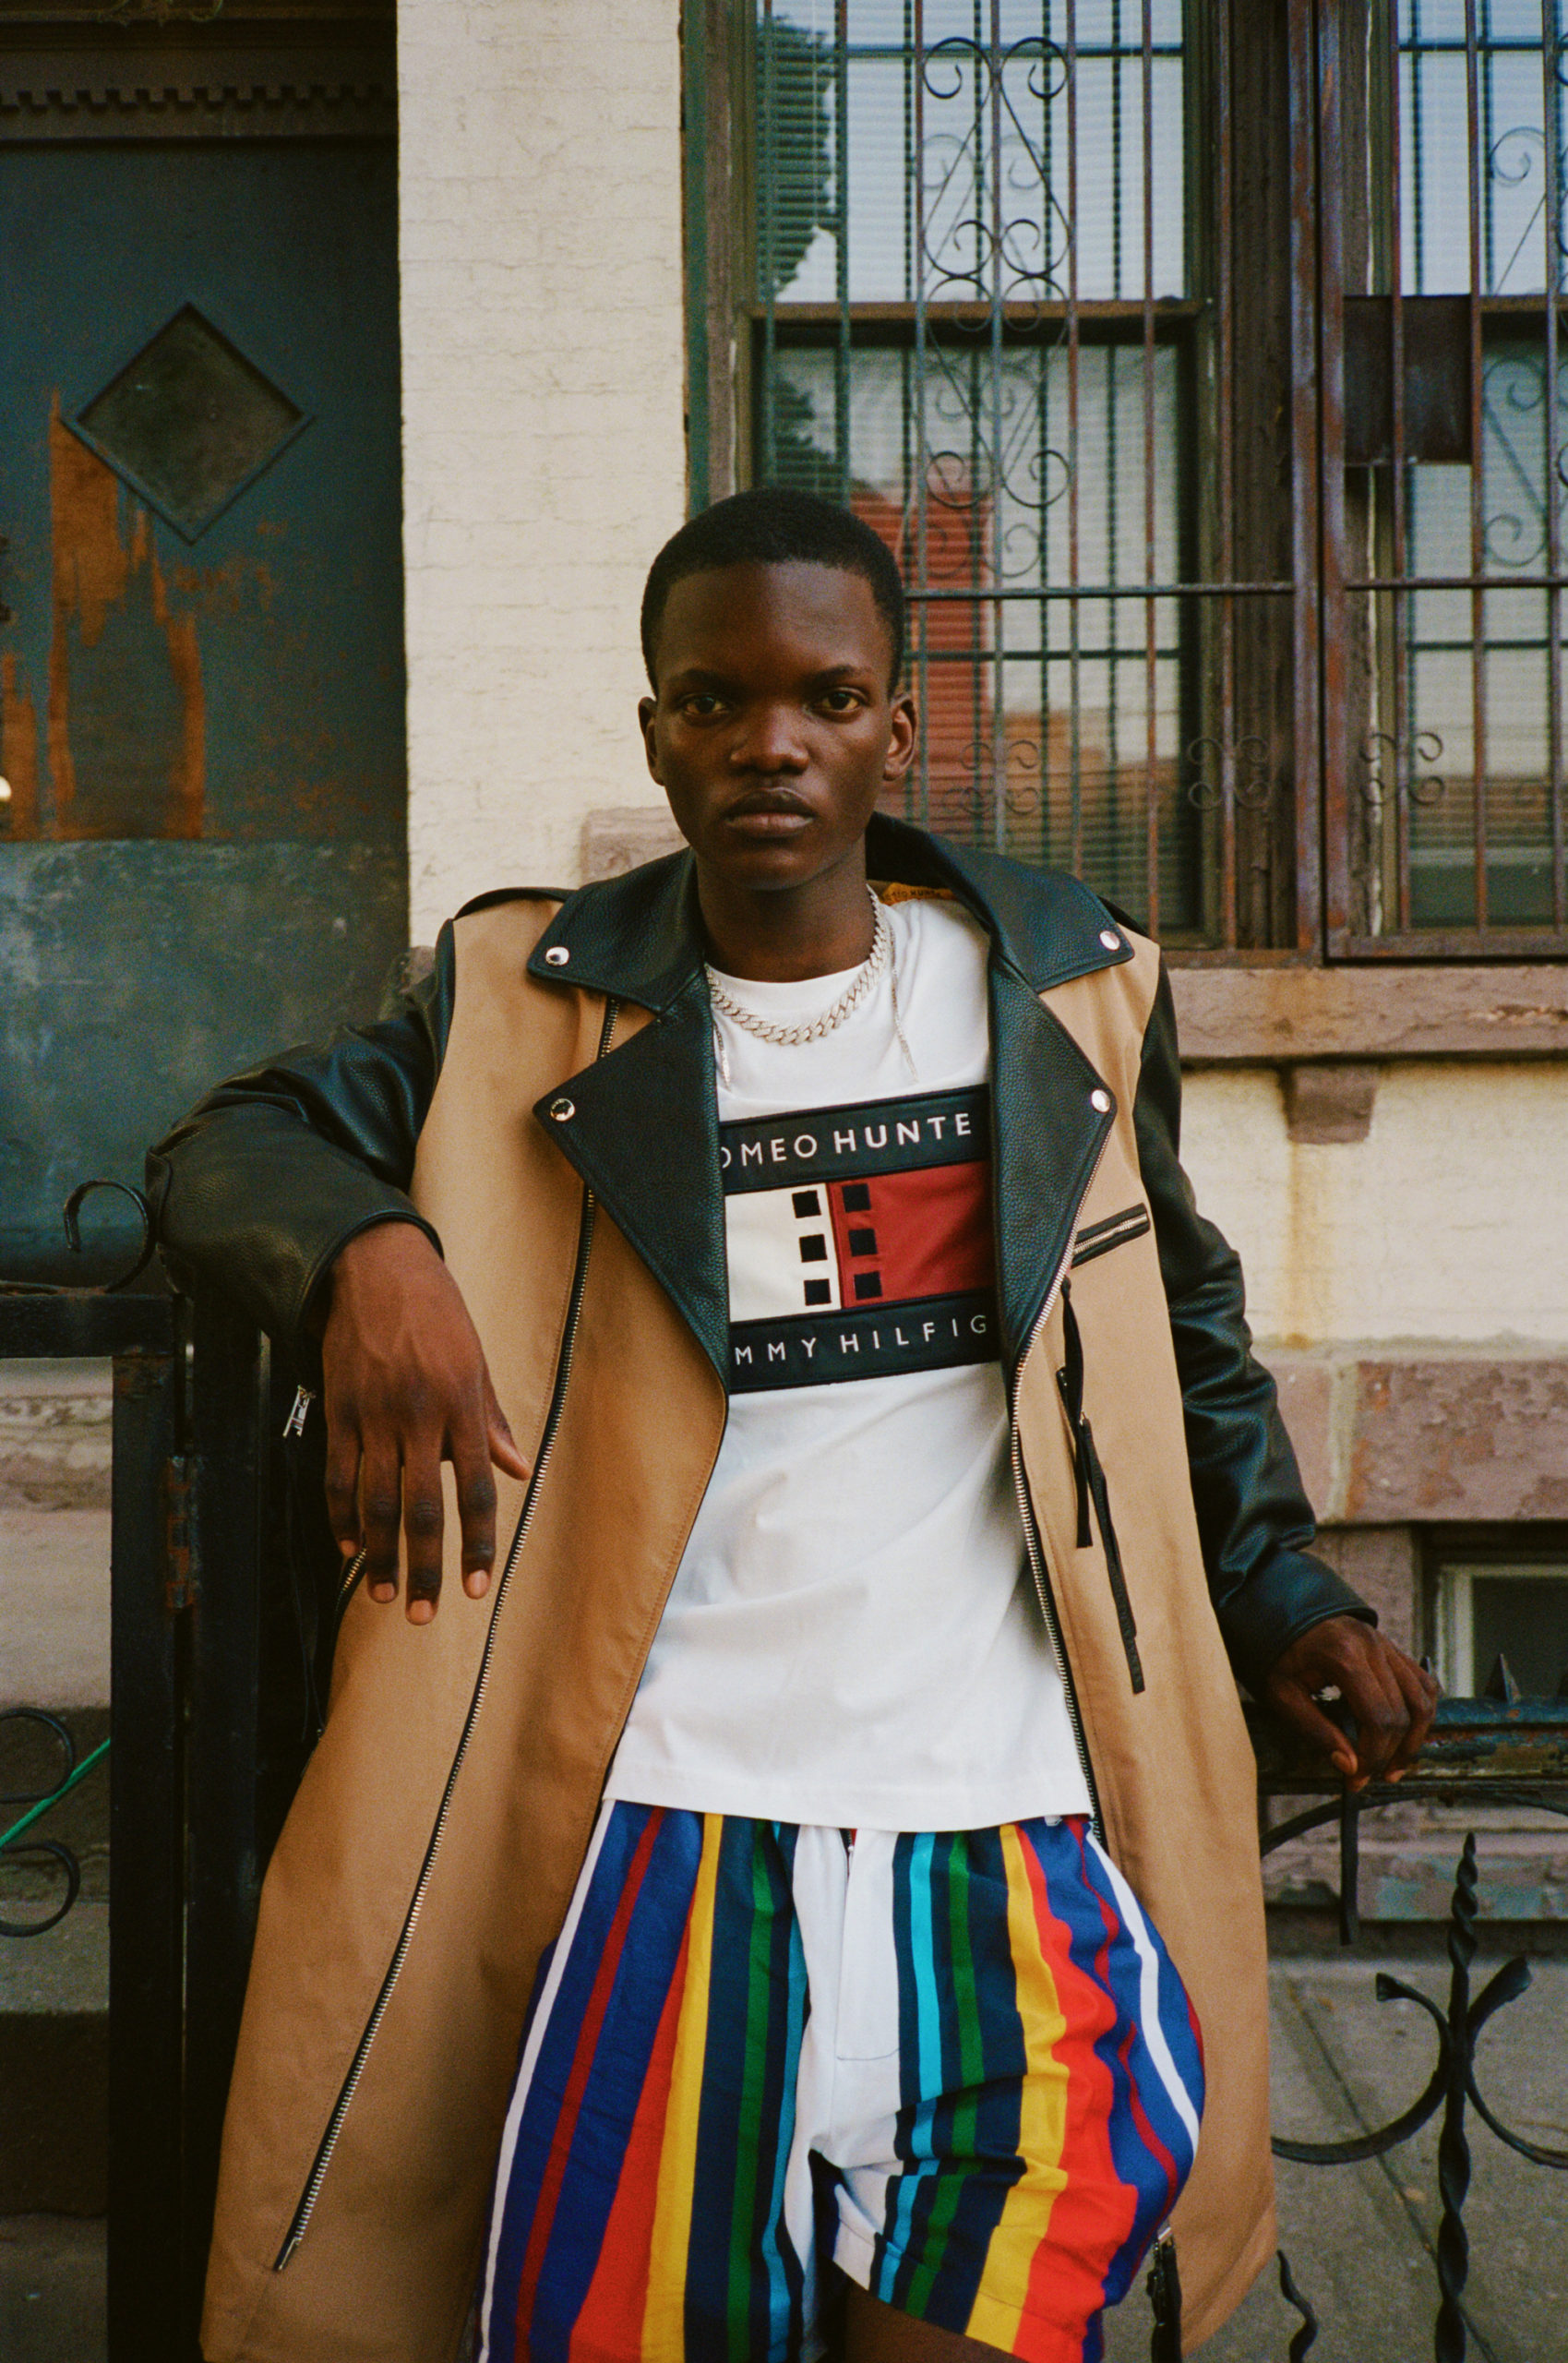 Romeo Hunte and Tommy Hilfiger on Brooklyn, Inspiration, and Teamwork